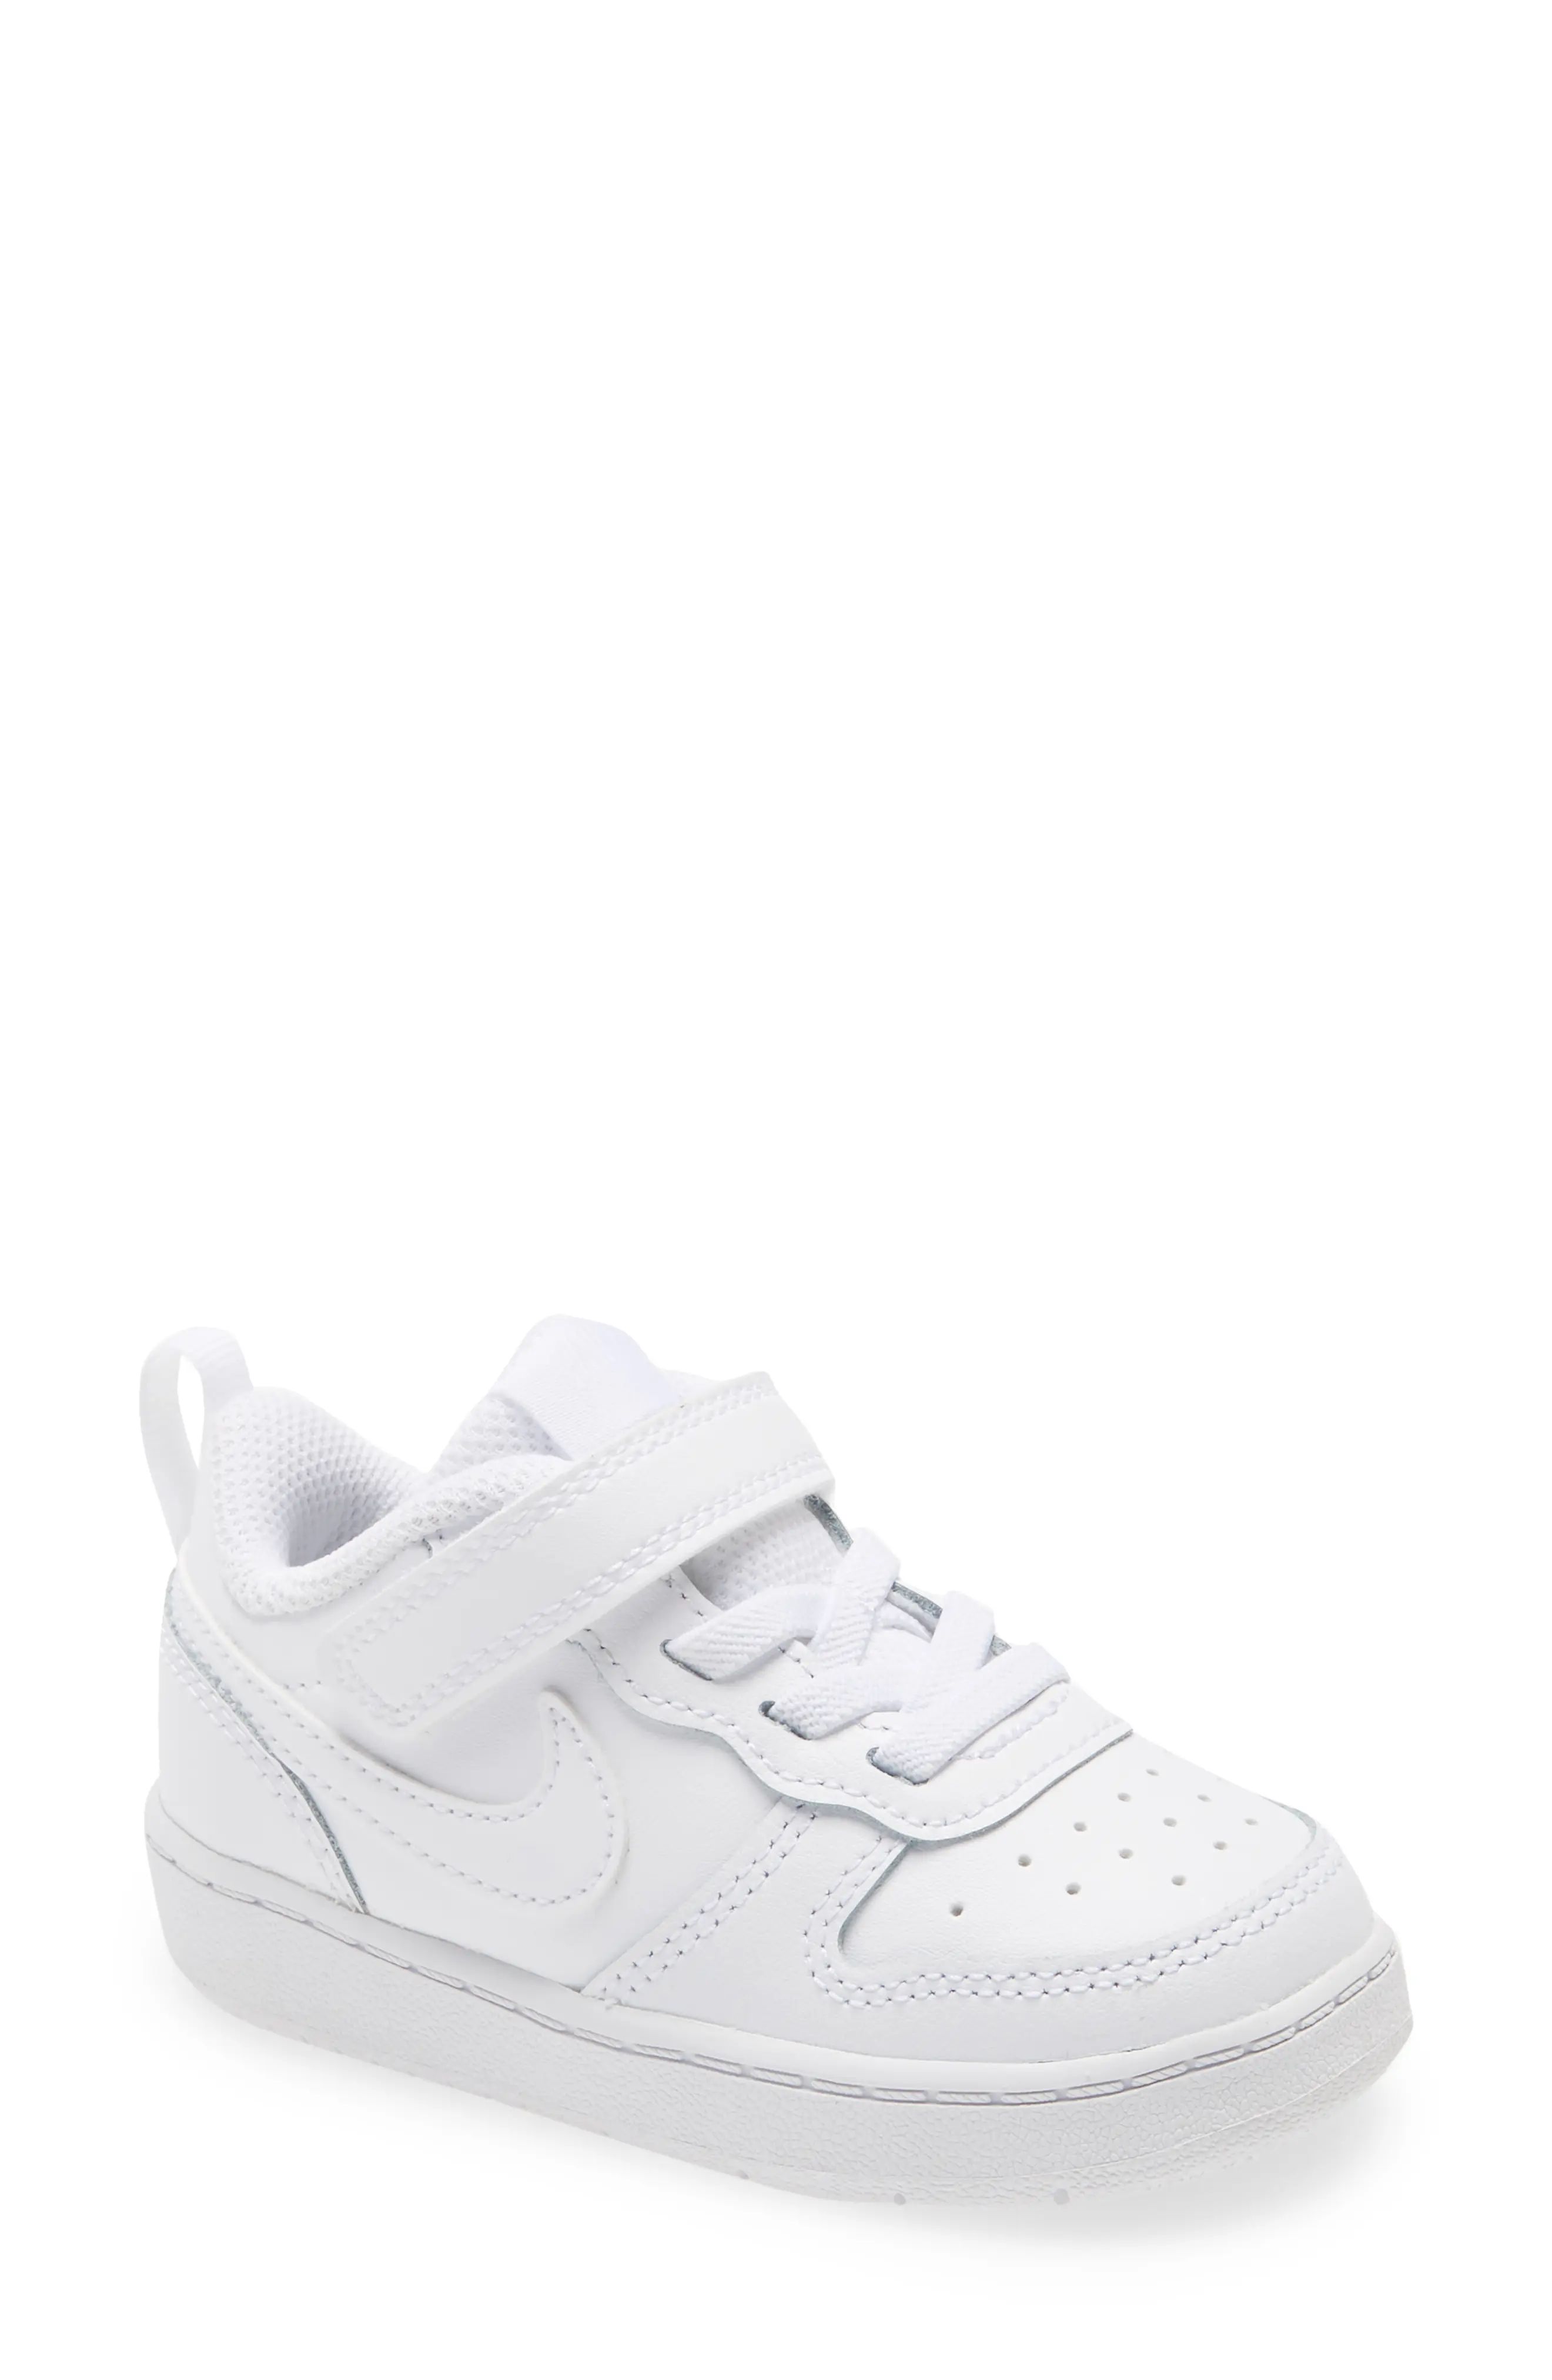 Nike Court Borough Low 2 Sneaker, Size 1 M in White/White at Nordstrom | Nordstrom